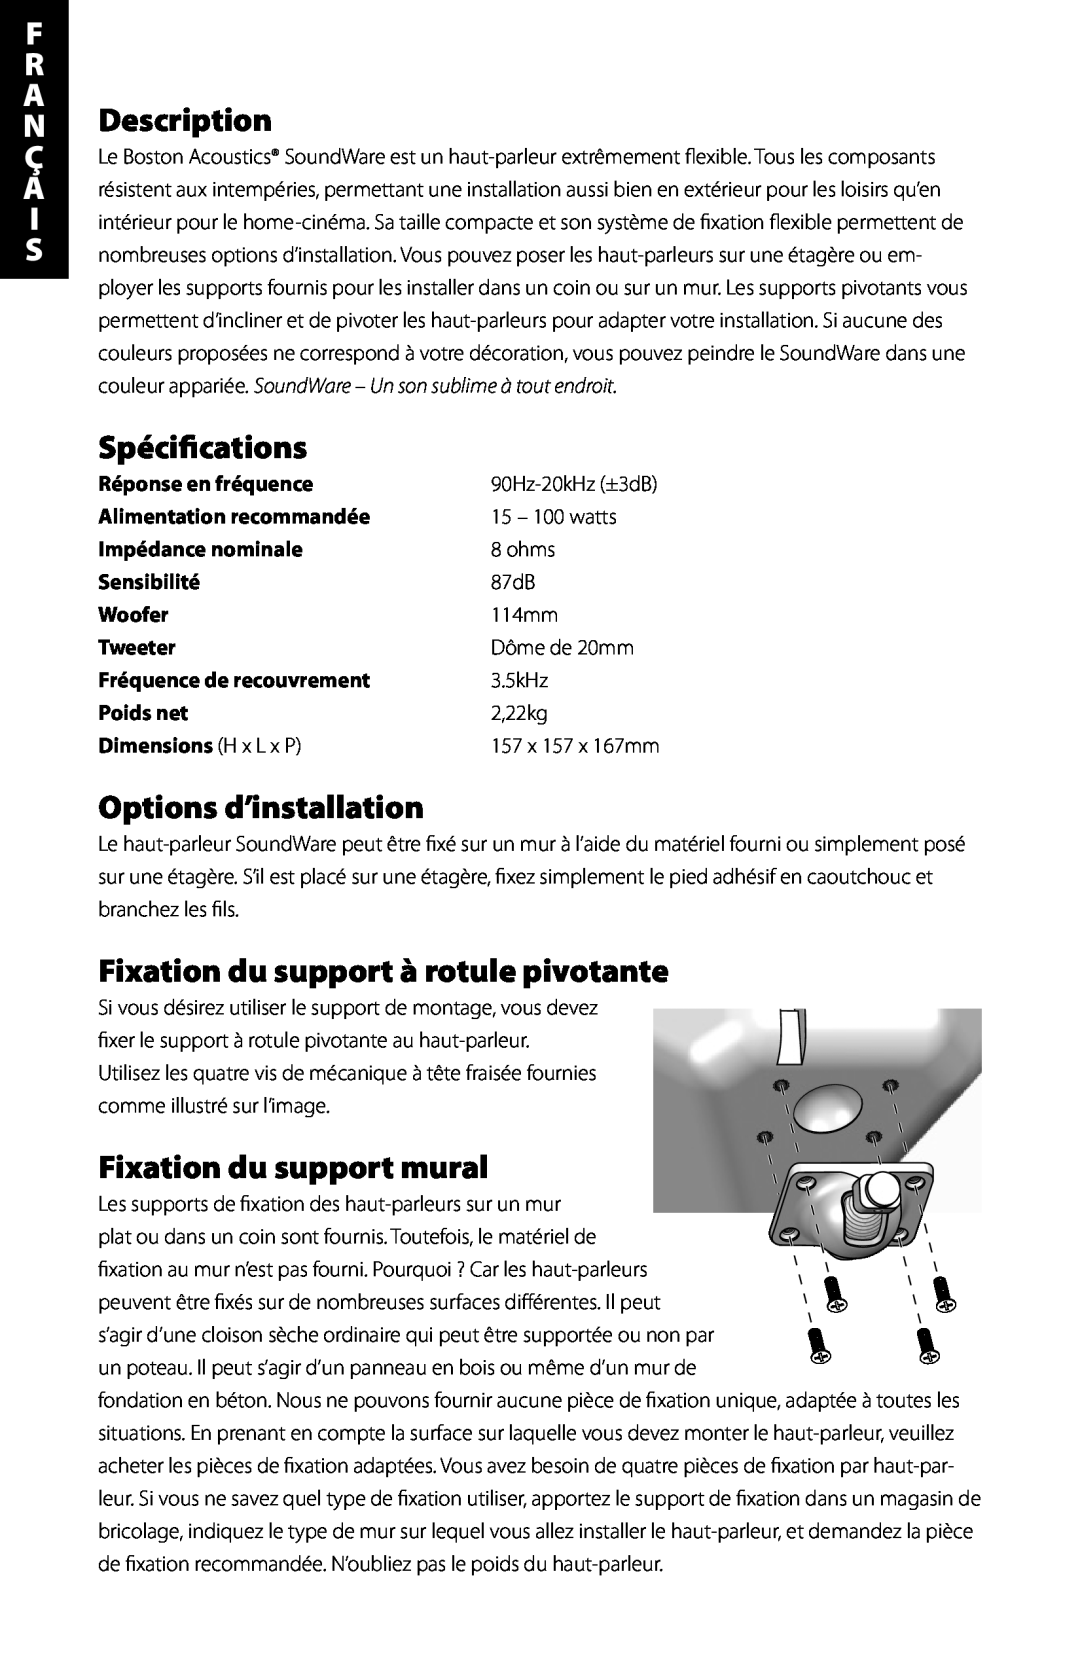 Boston Acoustics Indoor / Outdoor Speaker manual F R A, NDescription, Spécifications, Options d’installation 